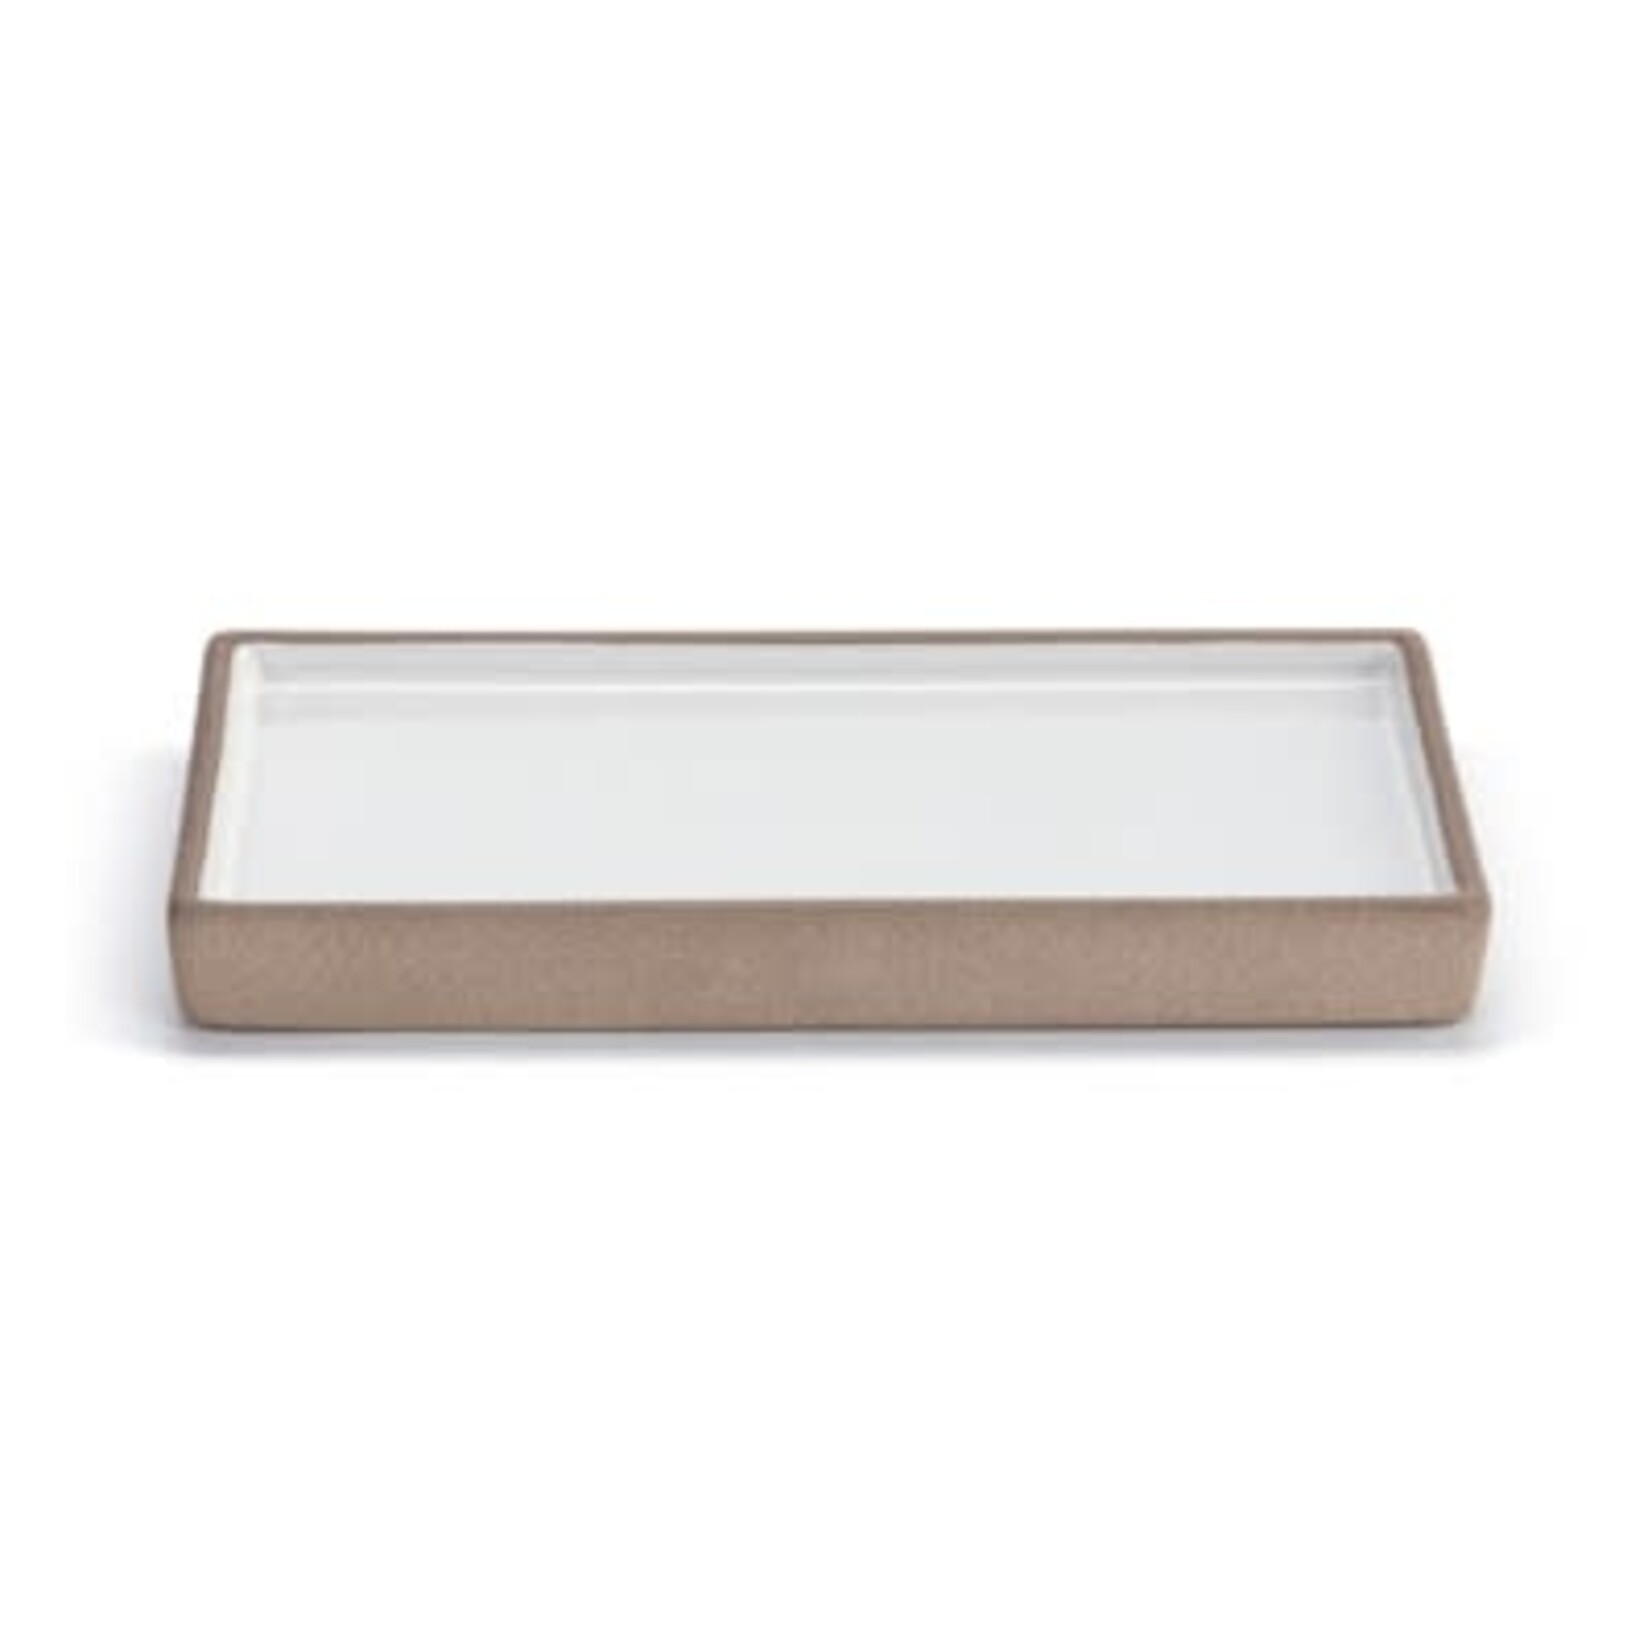 Demdaco RECT SMALL CERAMIC CANDLE TRAY